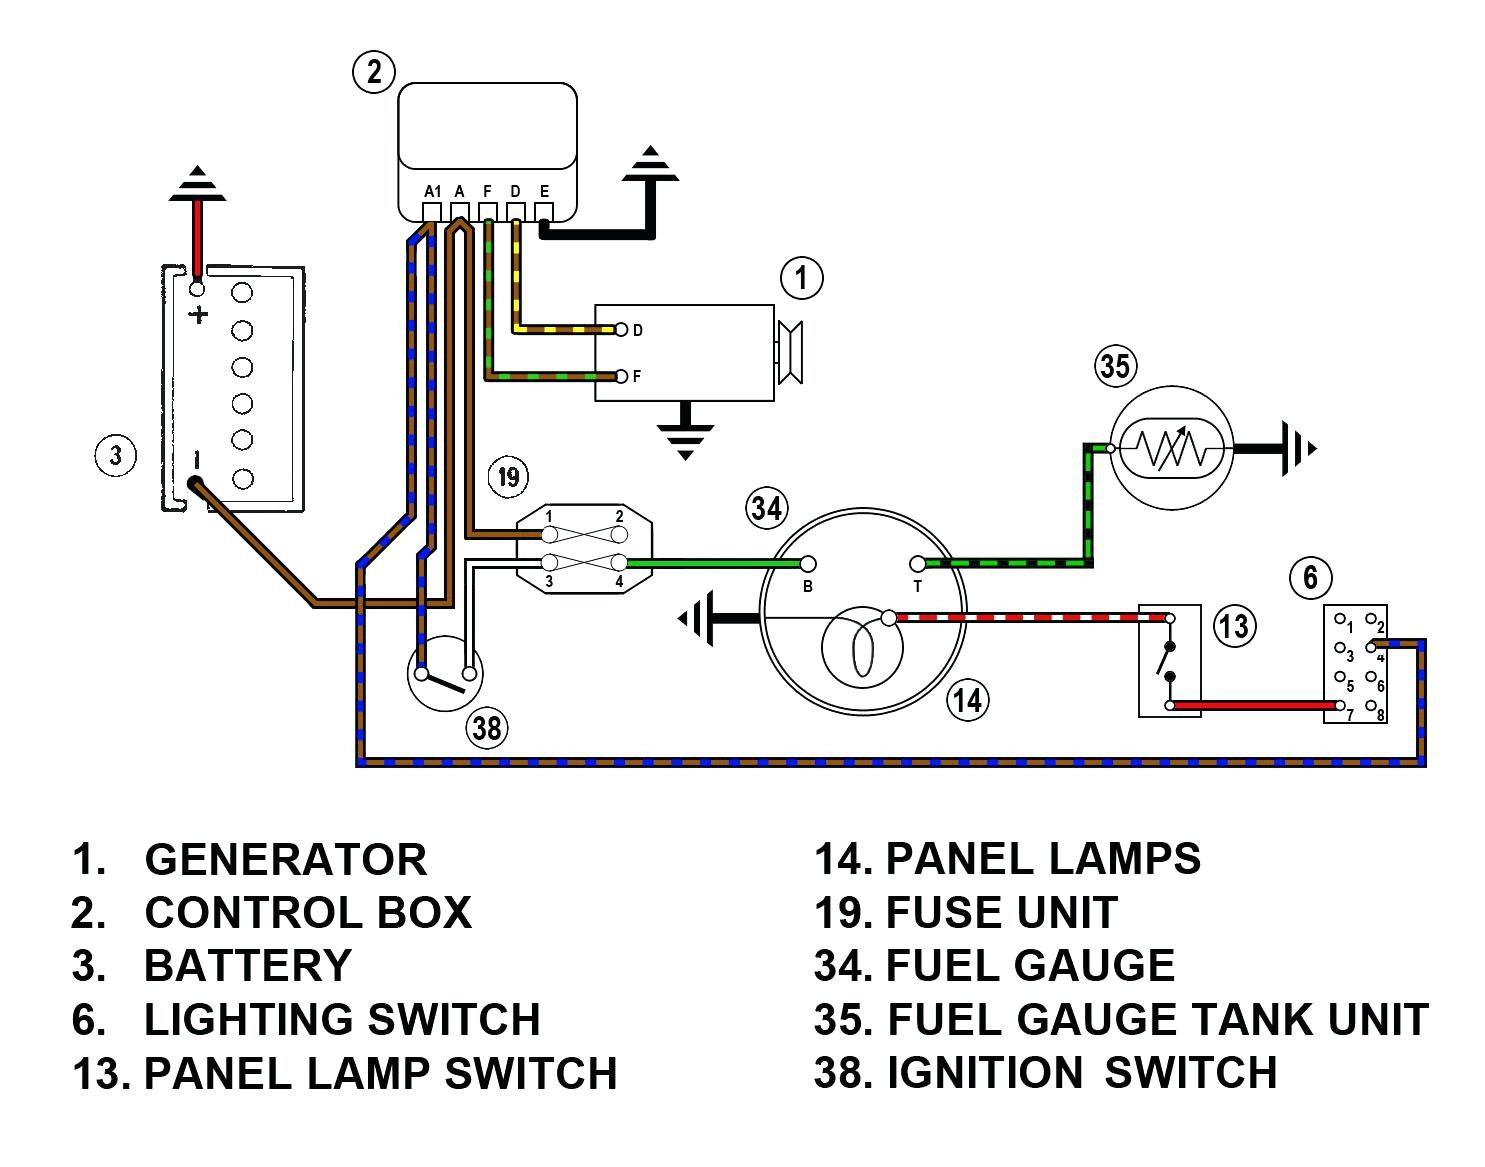 Full Size of Pj Trailer Junction Box Wiring Diagram Lovely Here Is A 7 Plug New